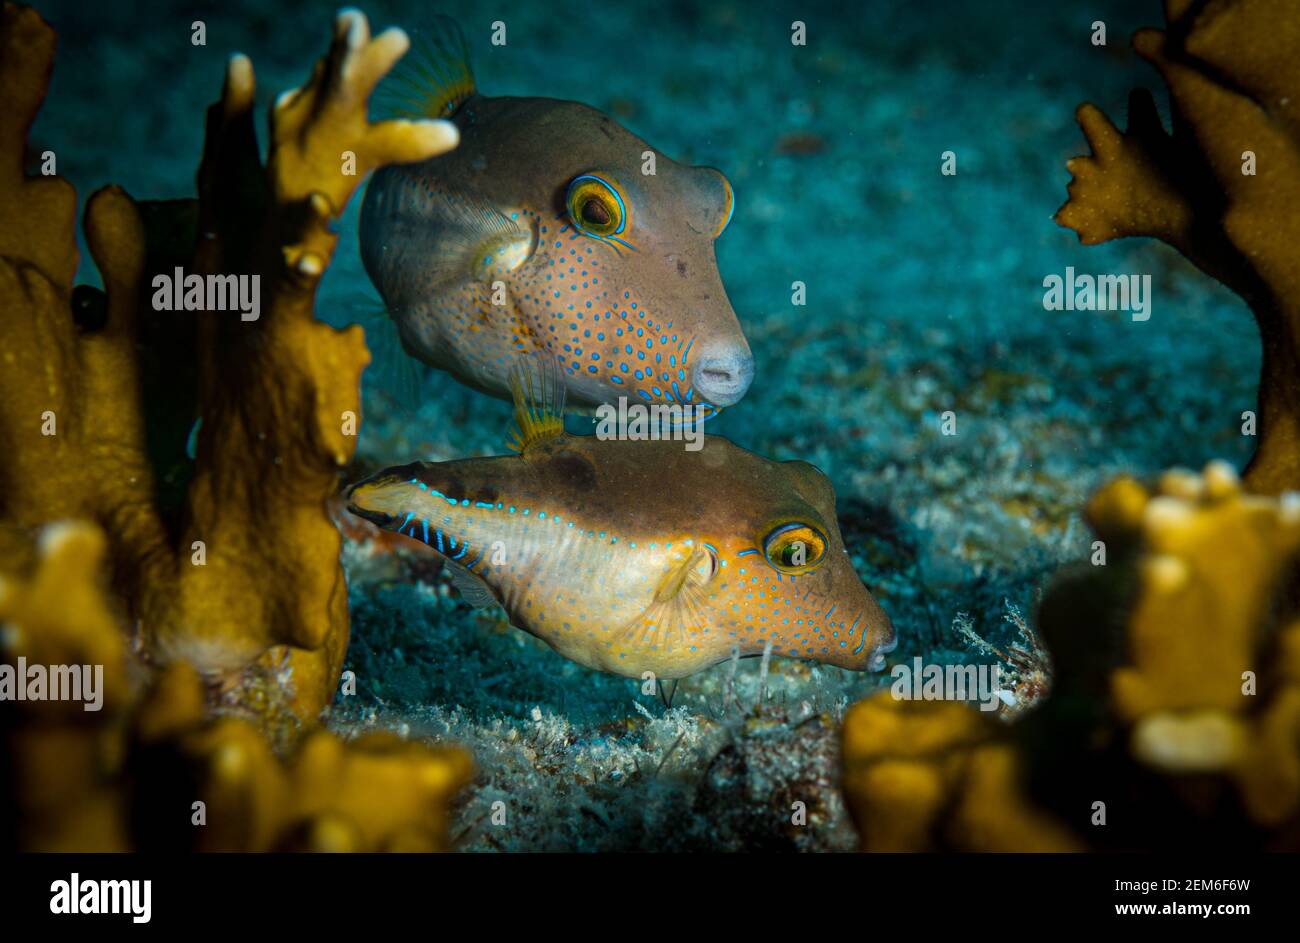 A pair of sharpnose pufferfish (Canthigaster rostrata) on the reef off Sint Maarten, Dutch Caribbean Stock Photo